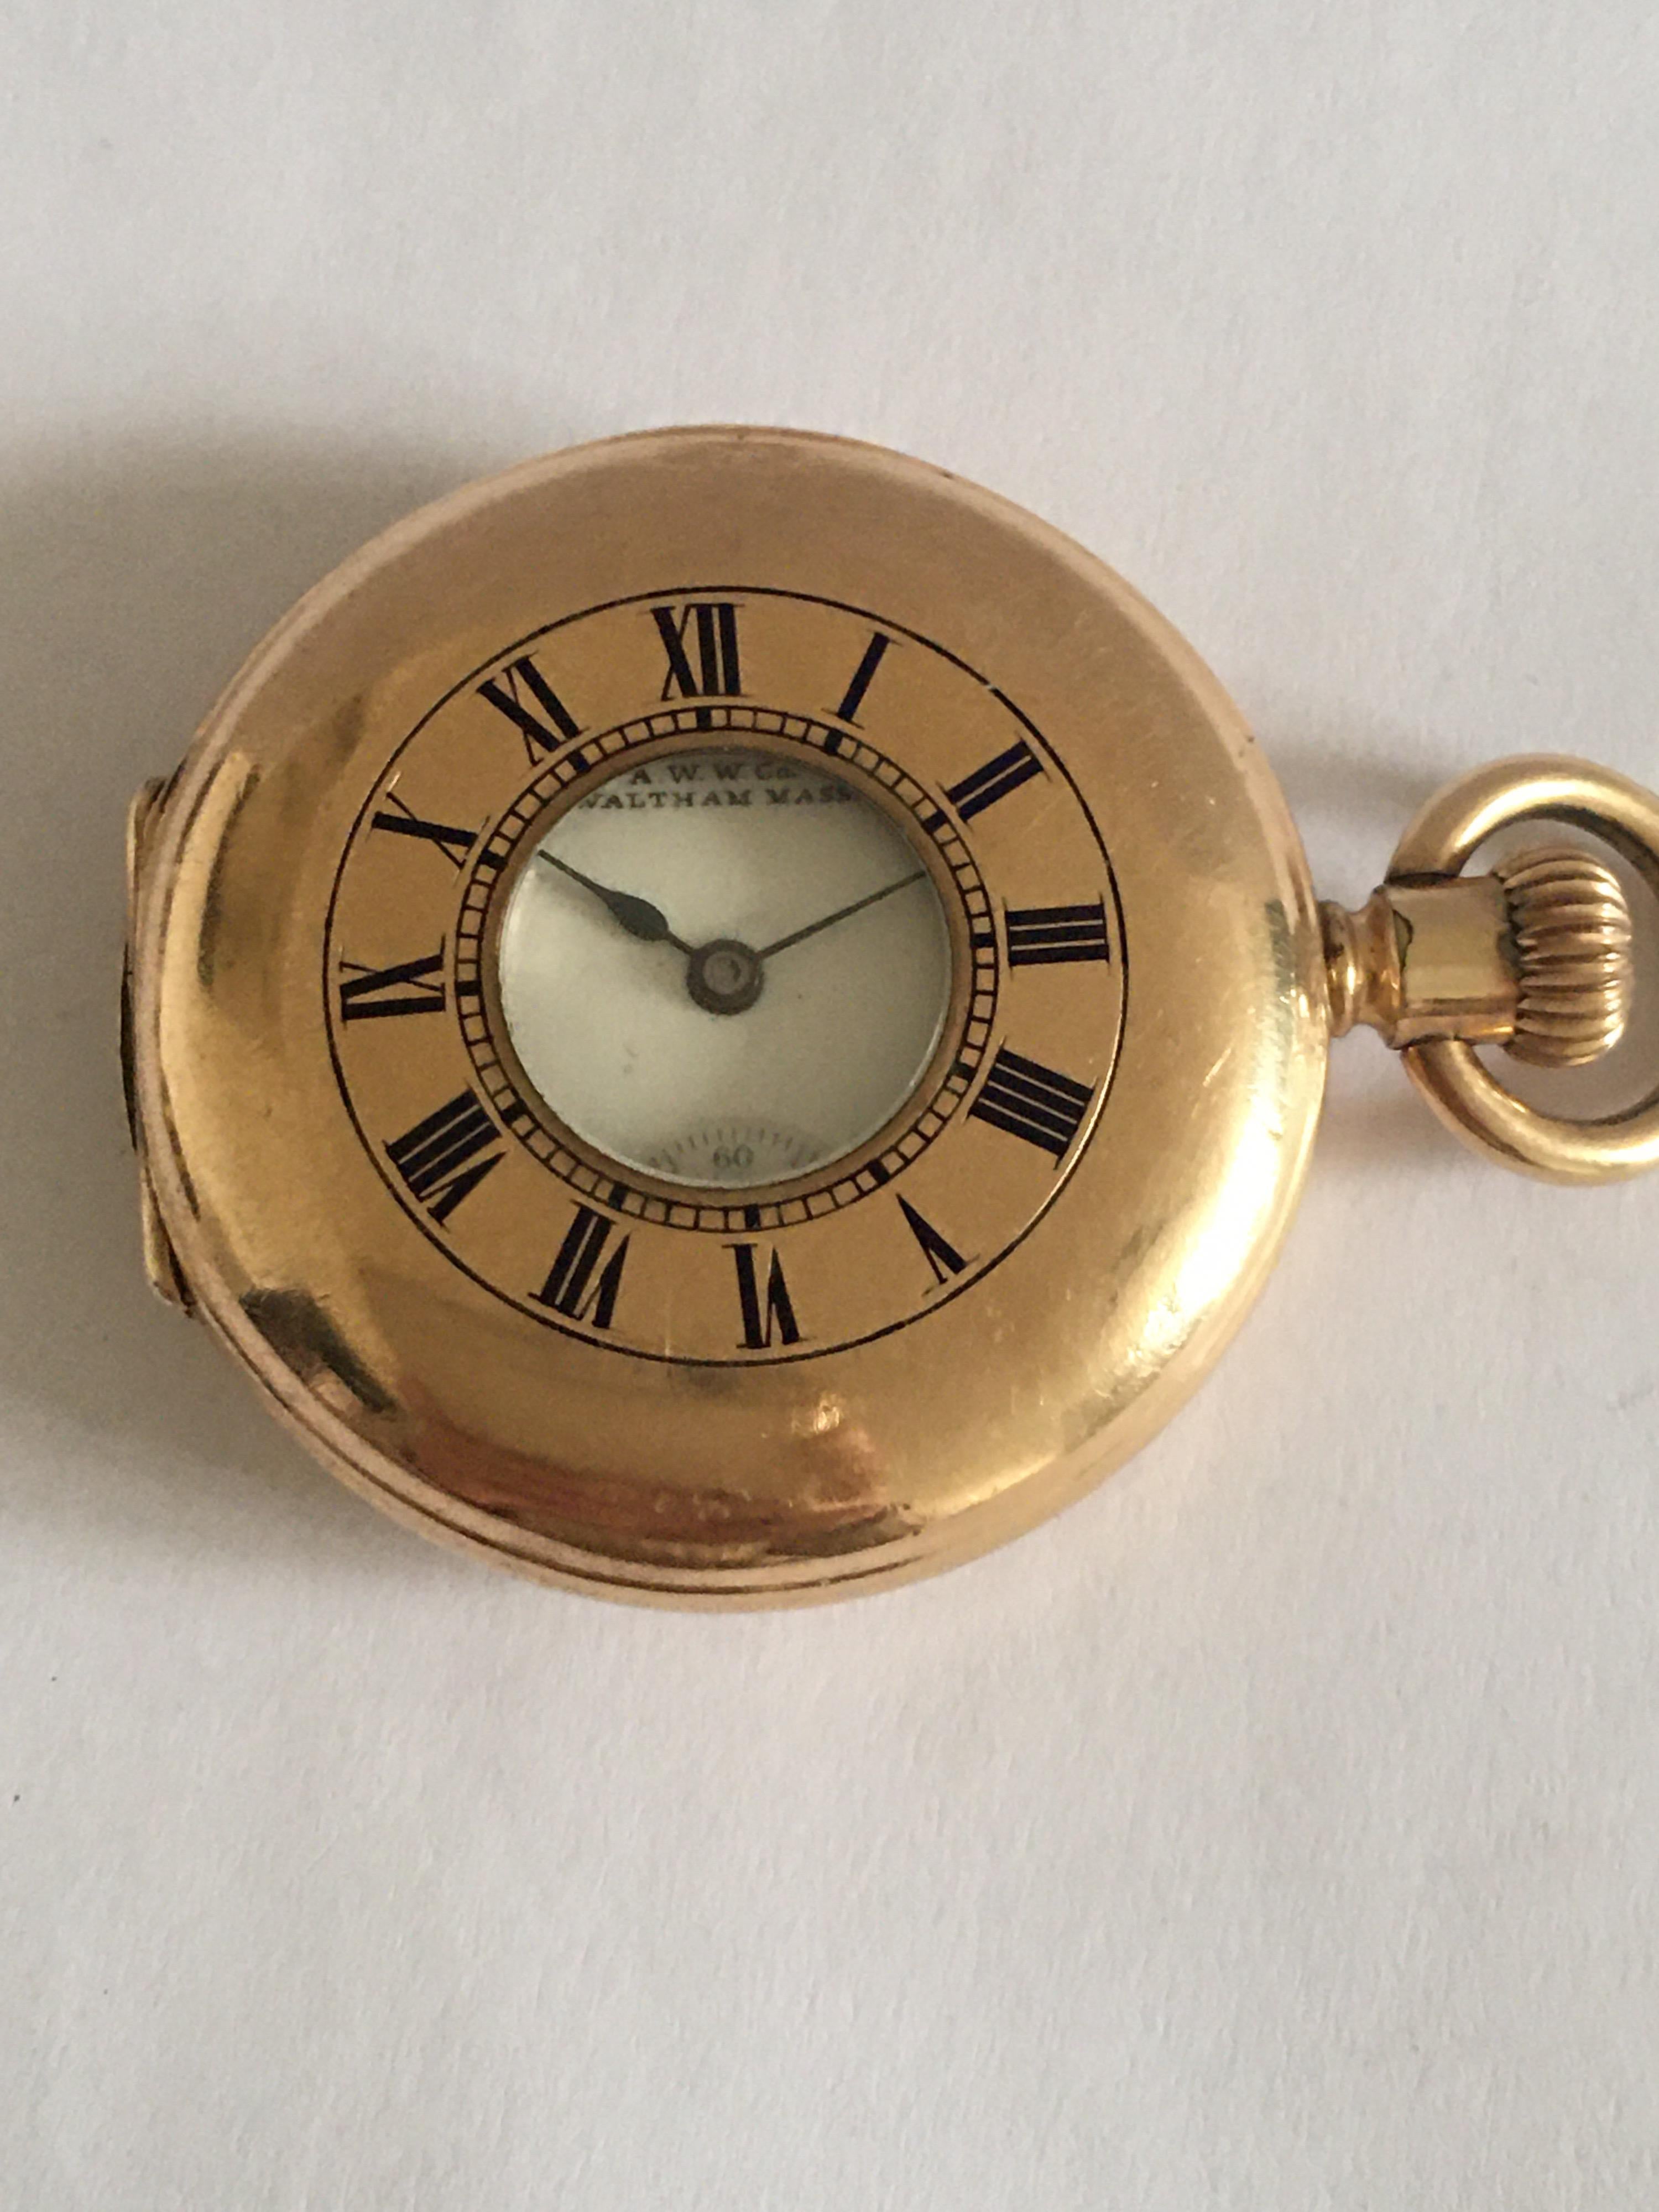 This beautiful antique small pocket watch is working and running well. 

Please study the images carefully as form part of the description.